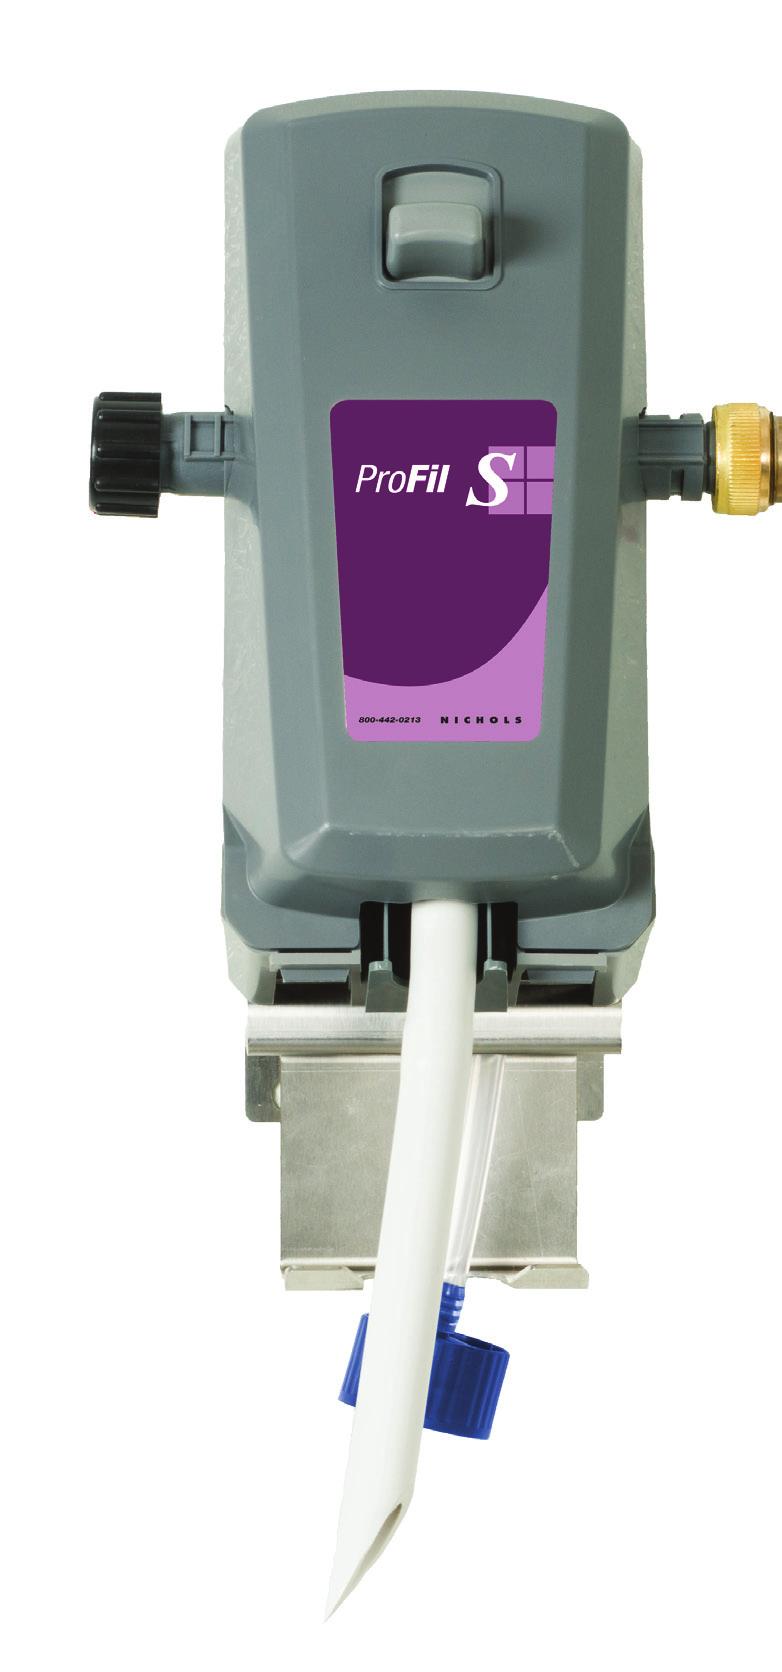 S Push button lever locks for filling up mop buckets and automatic scrubbers.